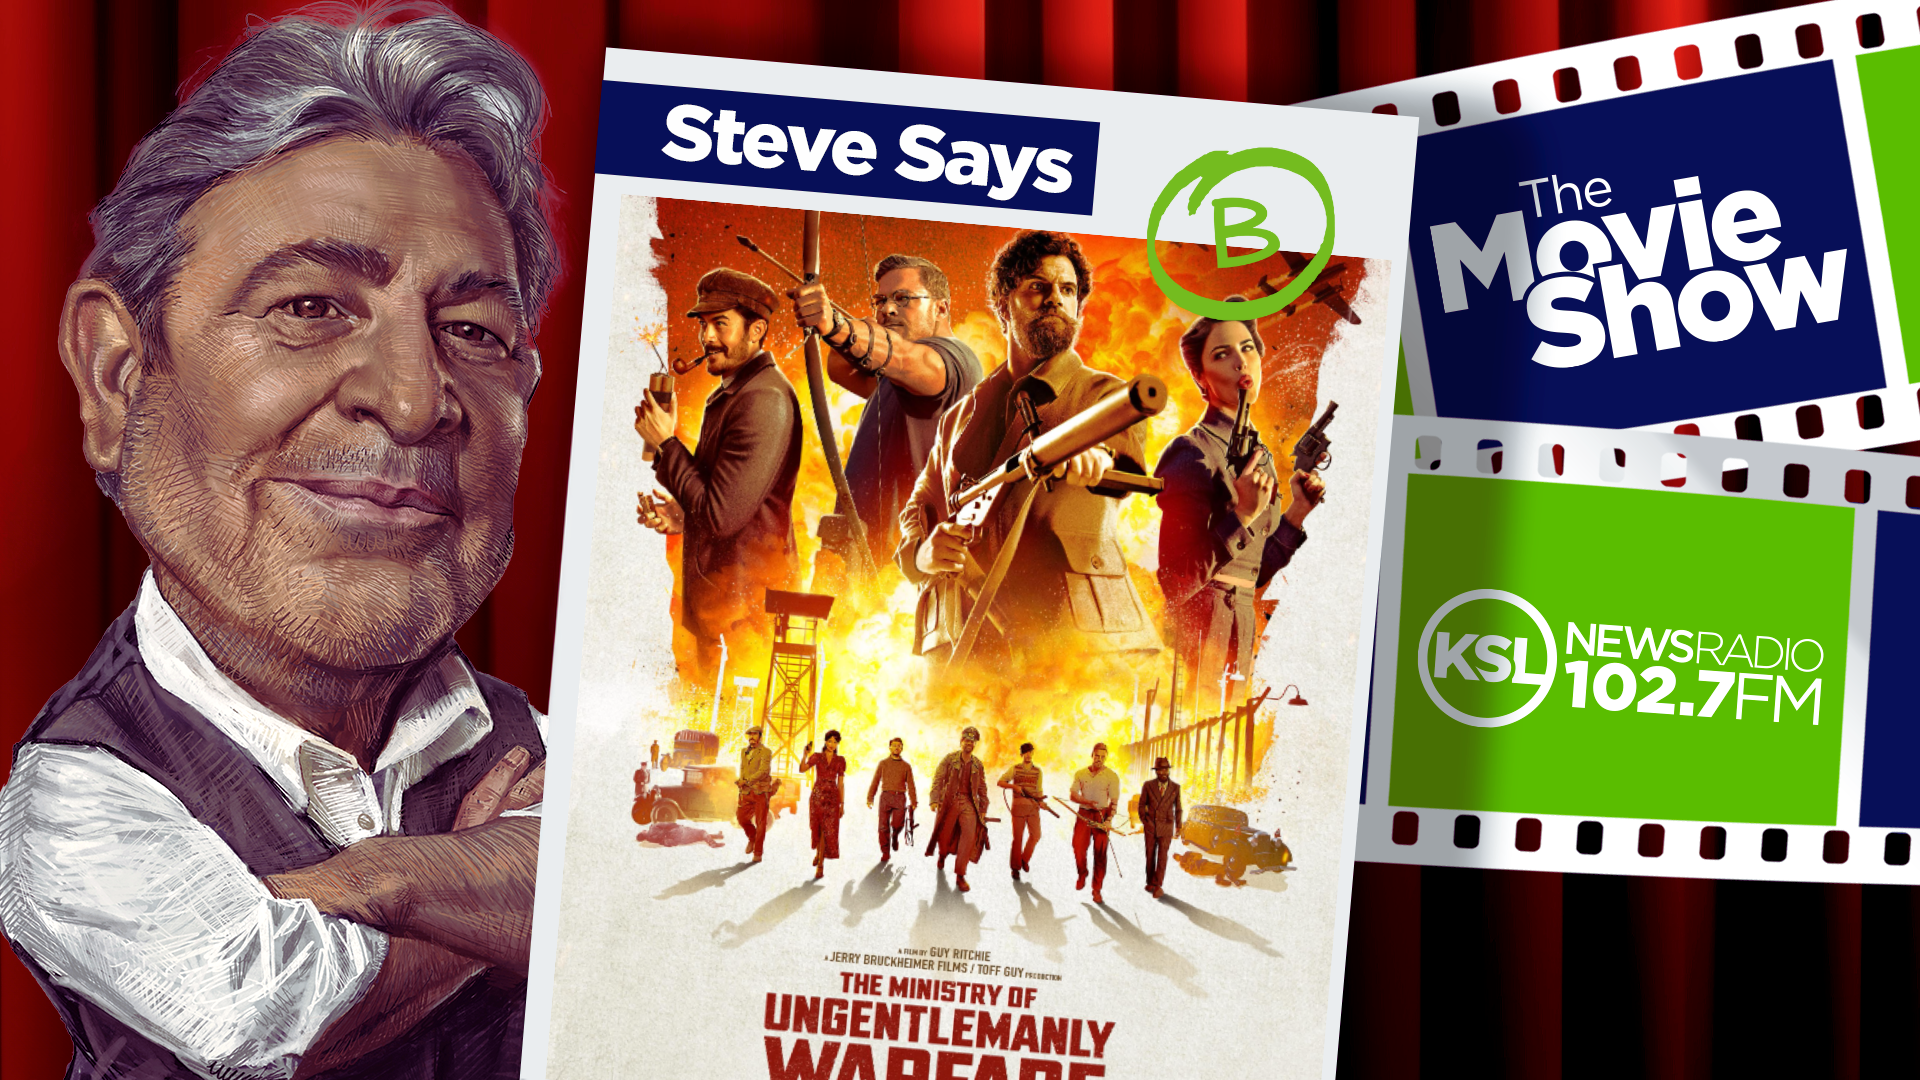 ksl movie show host steve salles next to 'The Ministry of Ungentlemanly Warfare' poster...